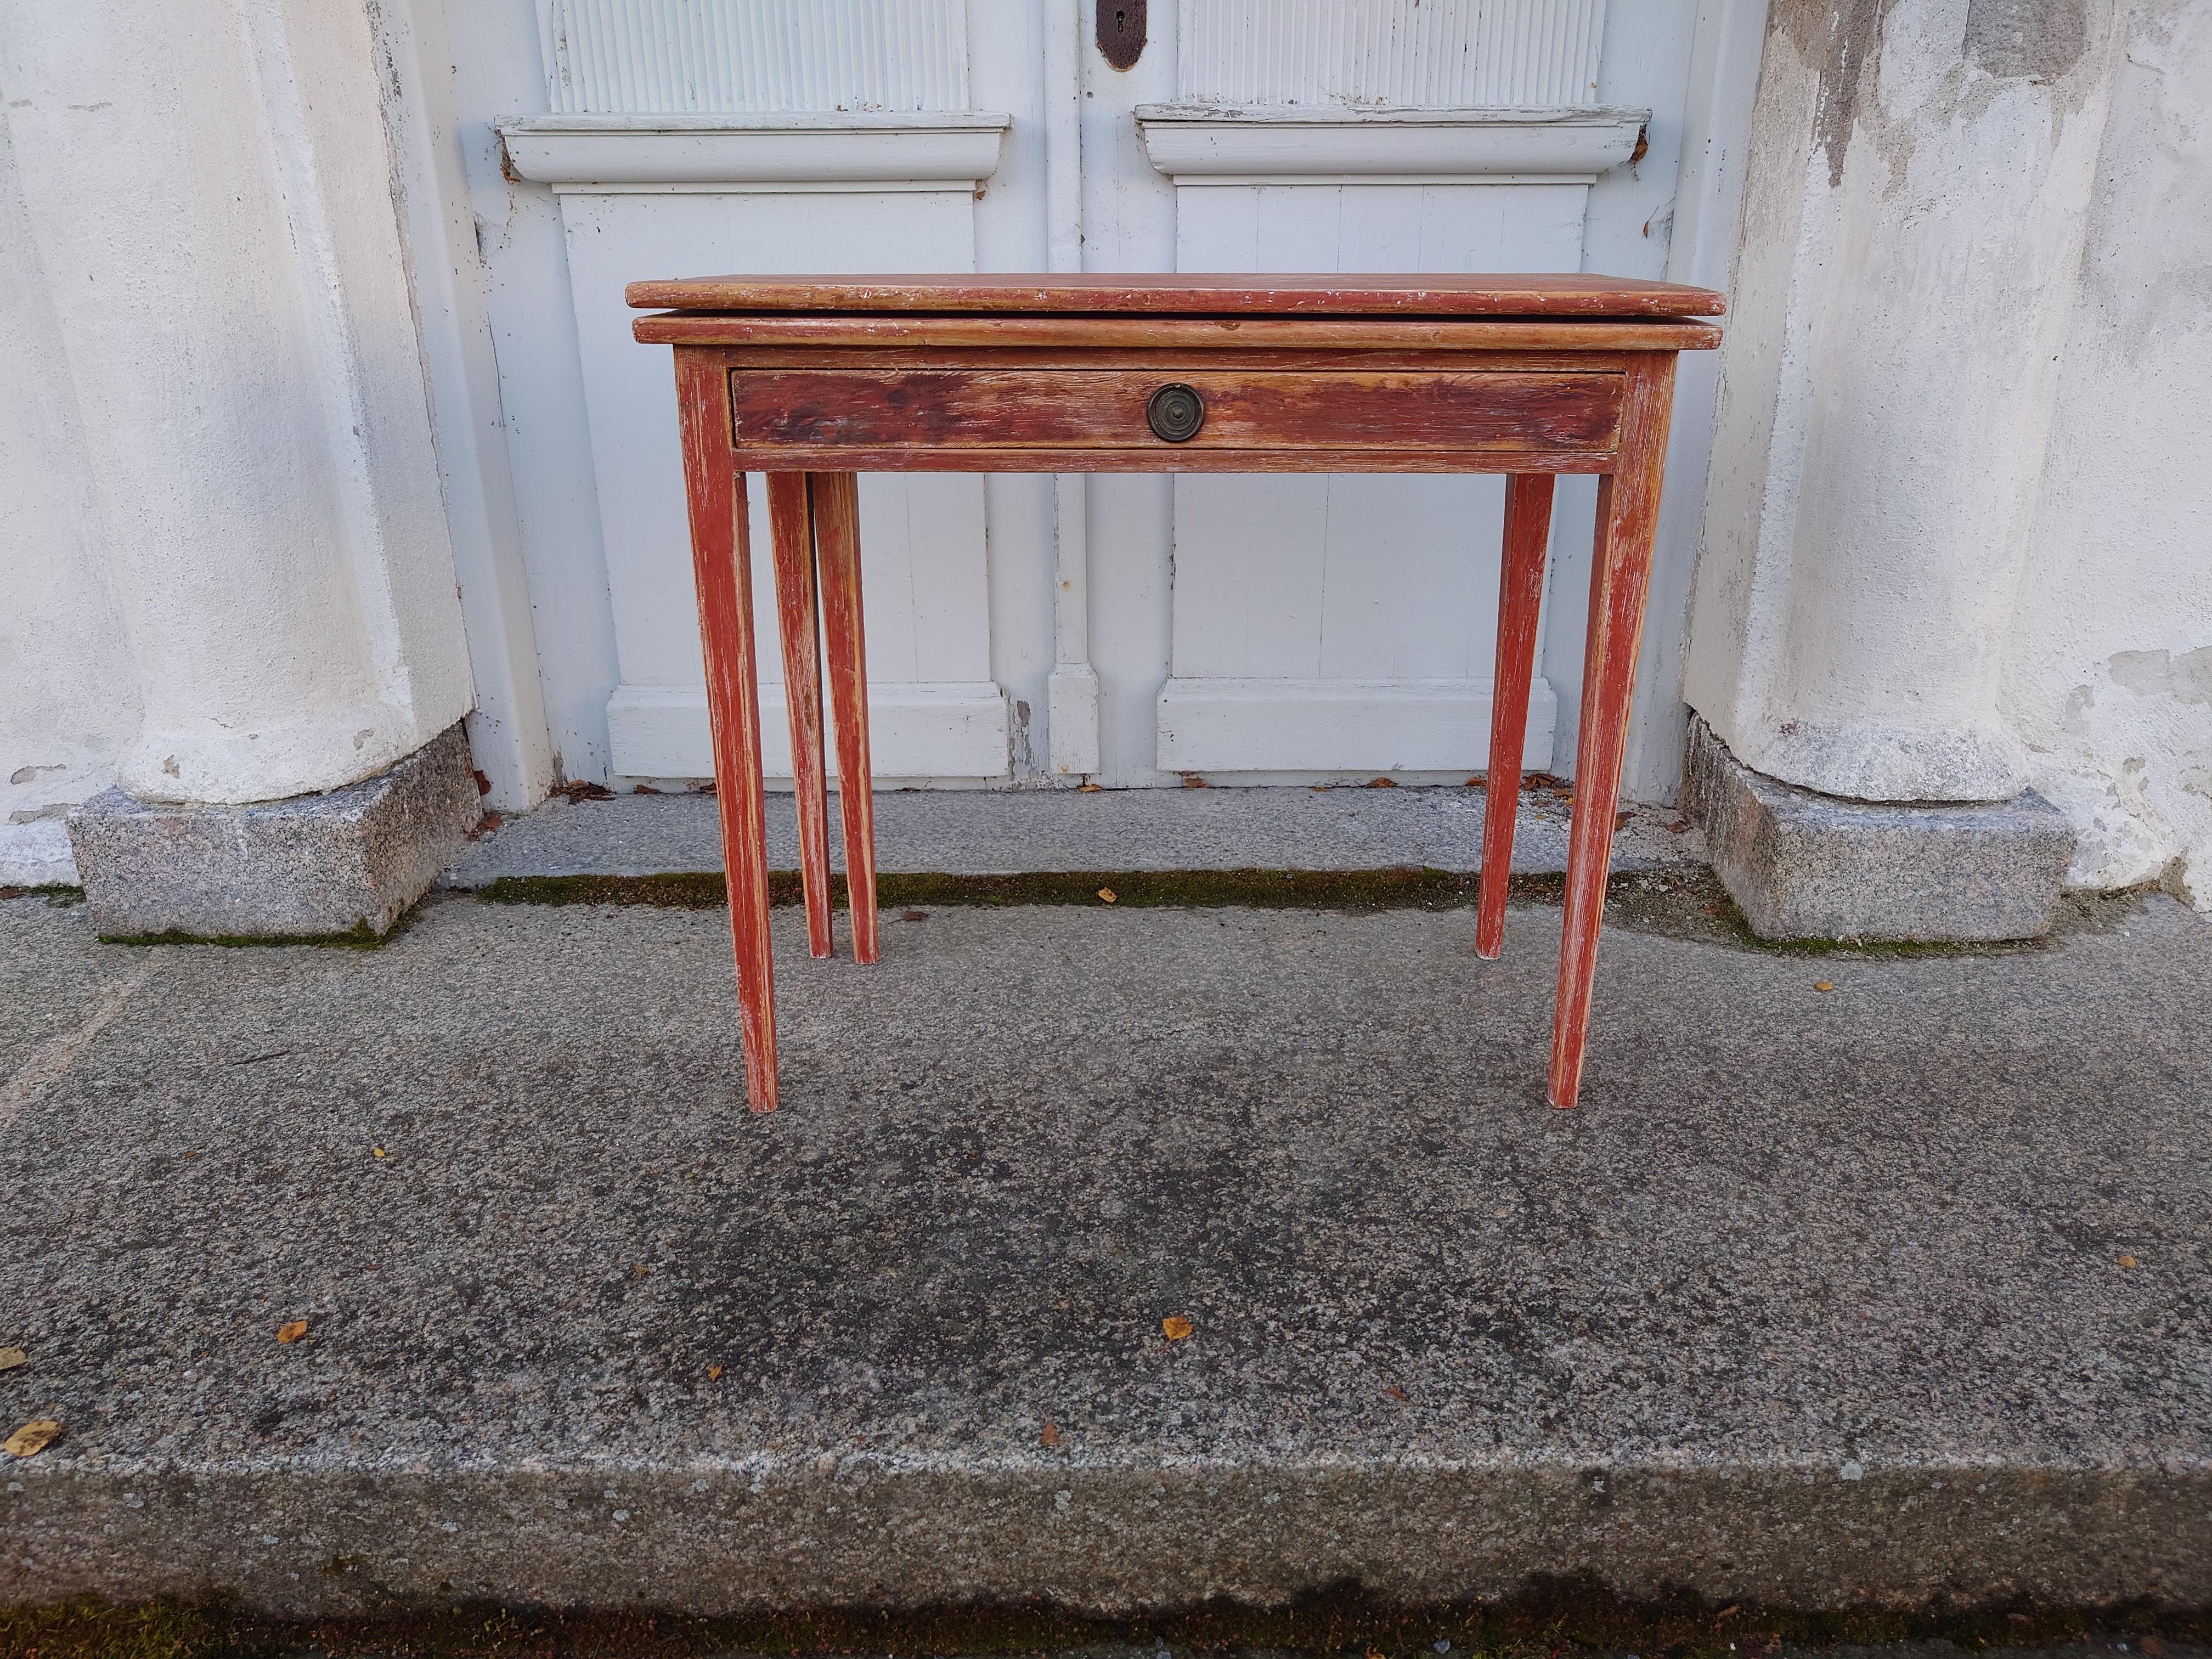 A lovely Swedish Gustavian Game table from the early 1800s.
The table is from Örnsköldsvik , Northern Sweden.
The table is scraped by hand to its charming original English red`color..
The Gustavian table has elegant tapered legs.
Its  not just a